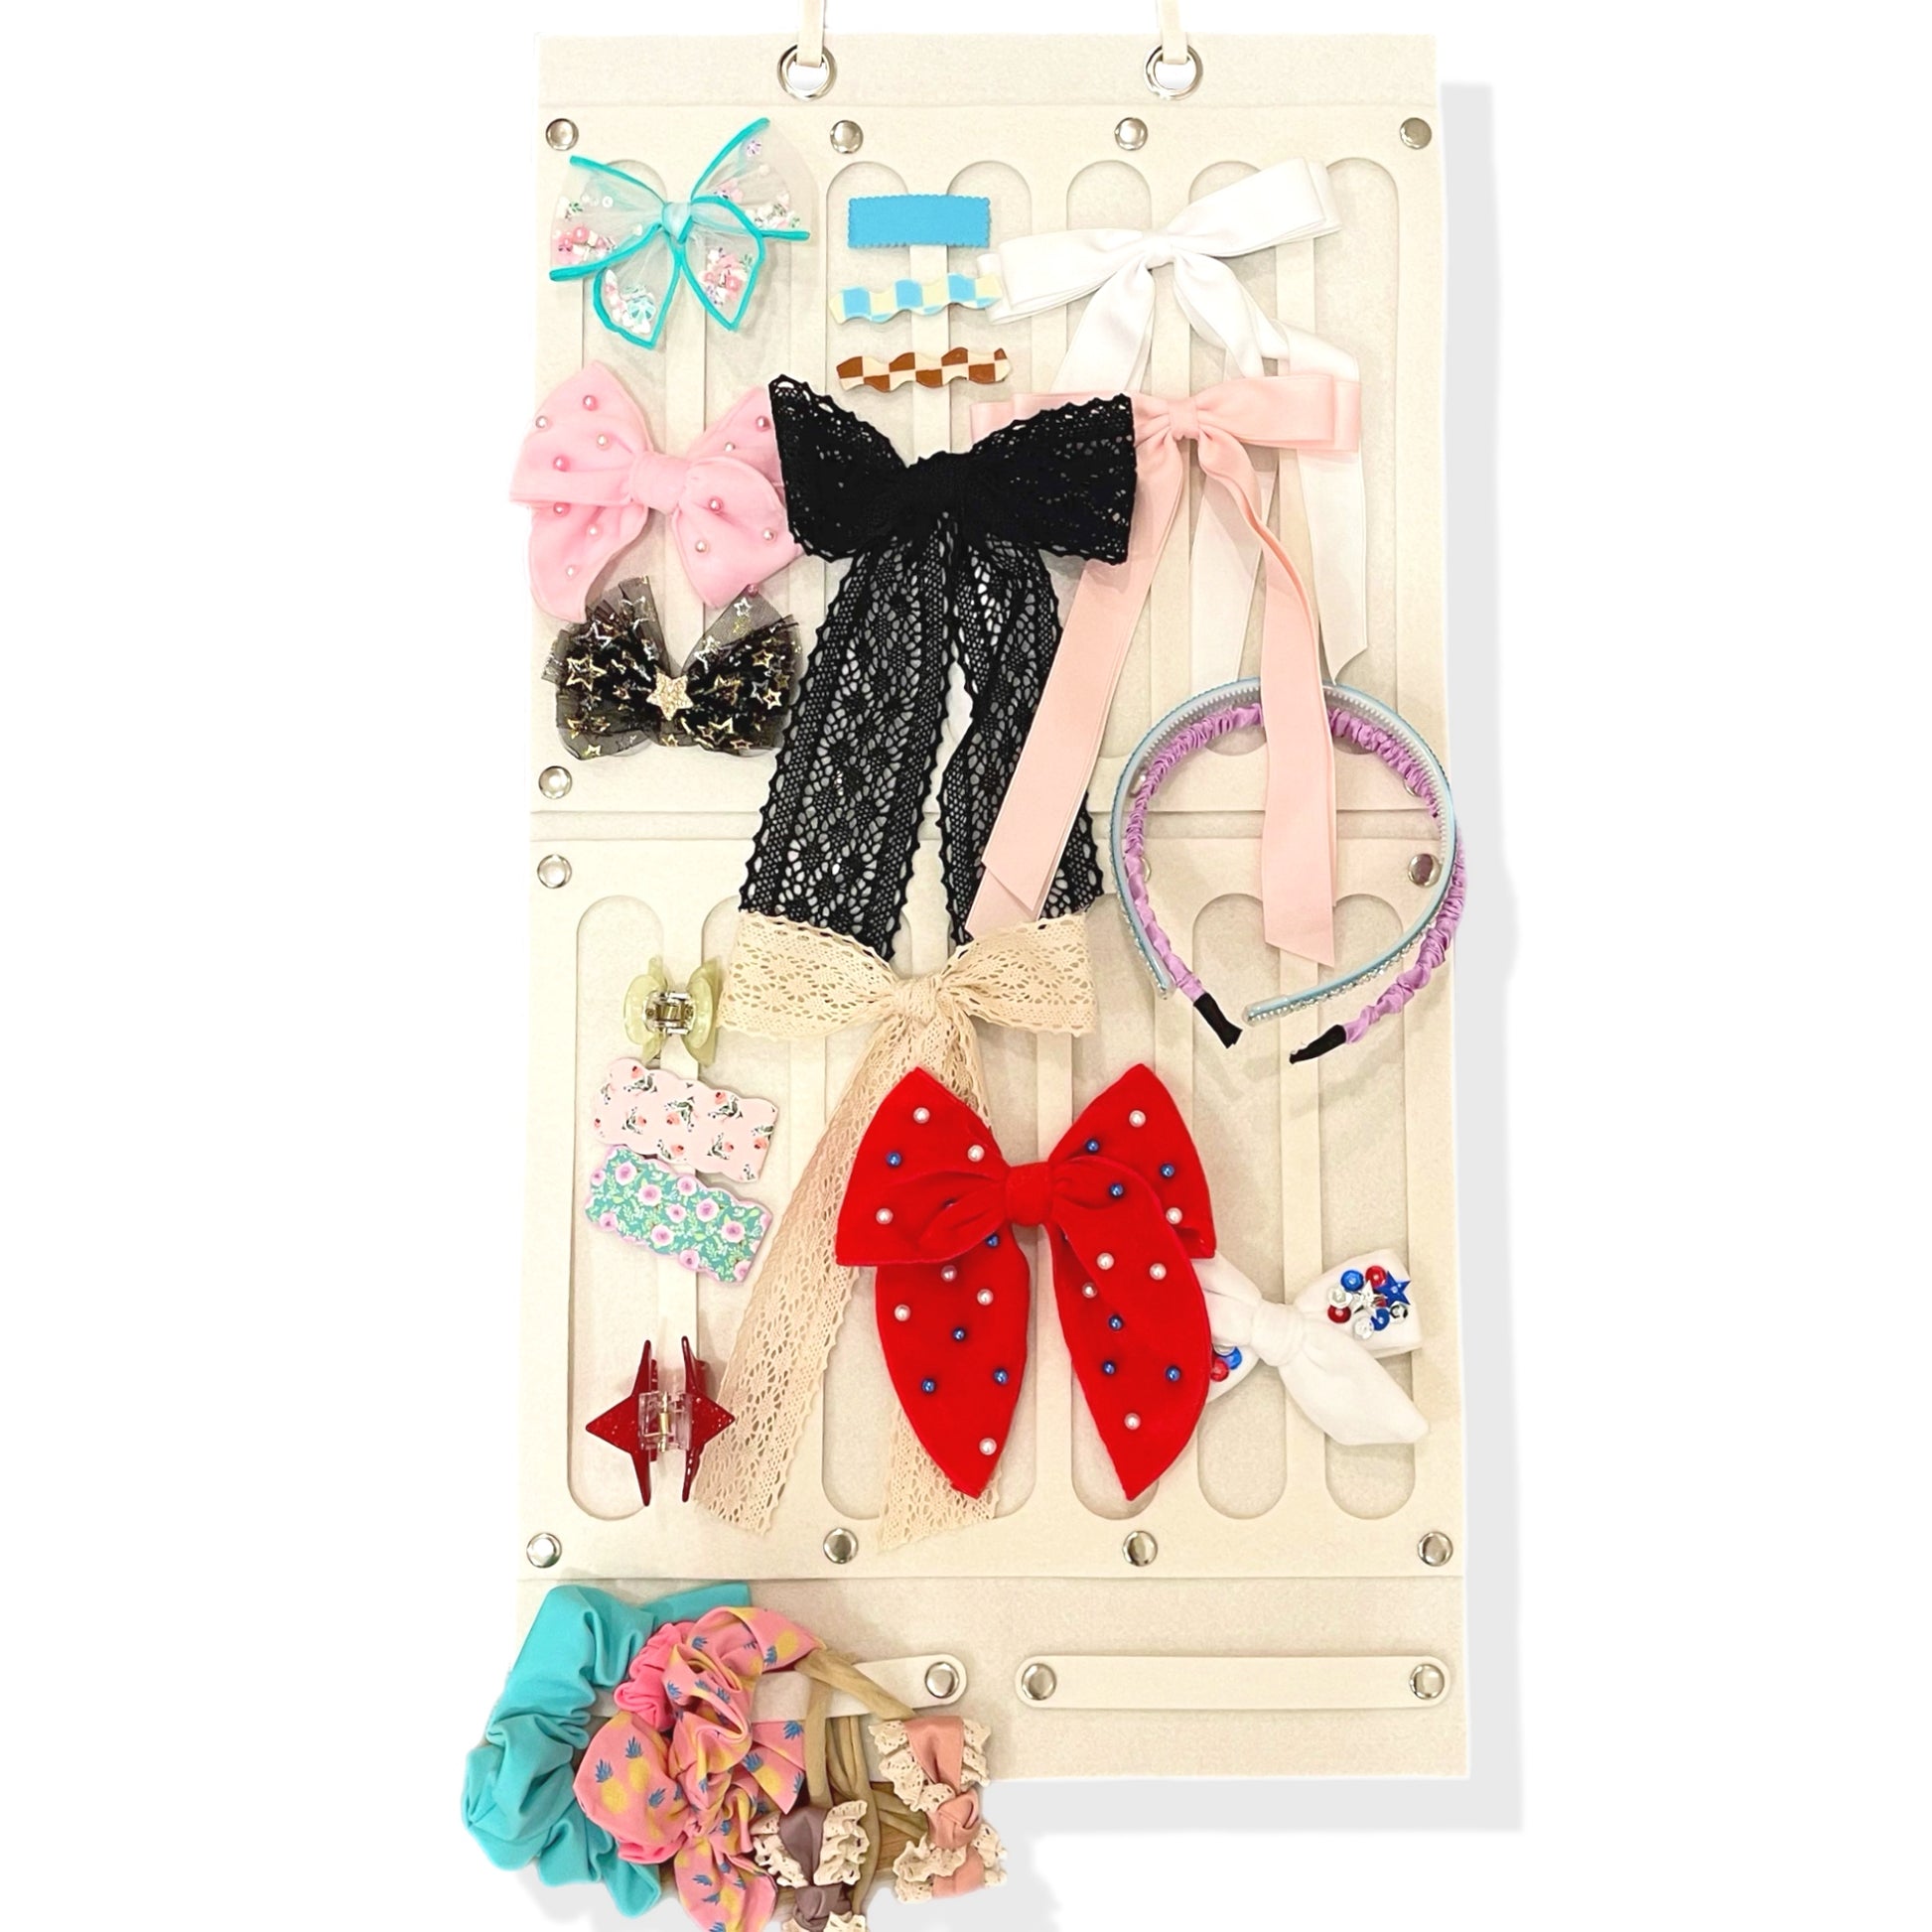 This felt bow organizer is an amazing storage option for bows, headbands, and hair clips. The organizer has two grommets on the top so it can be hung on a wall or door.